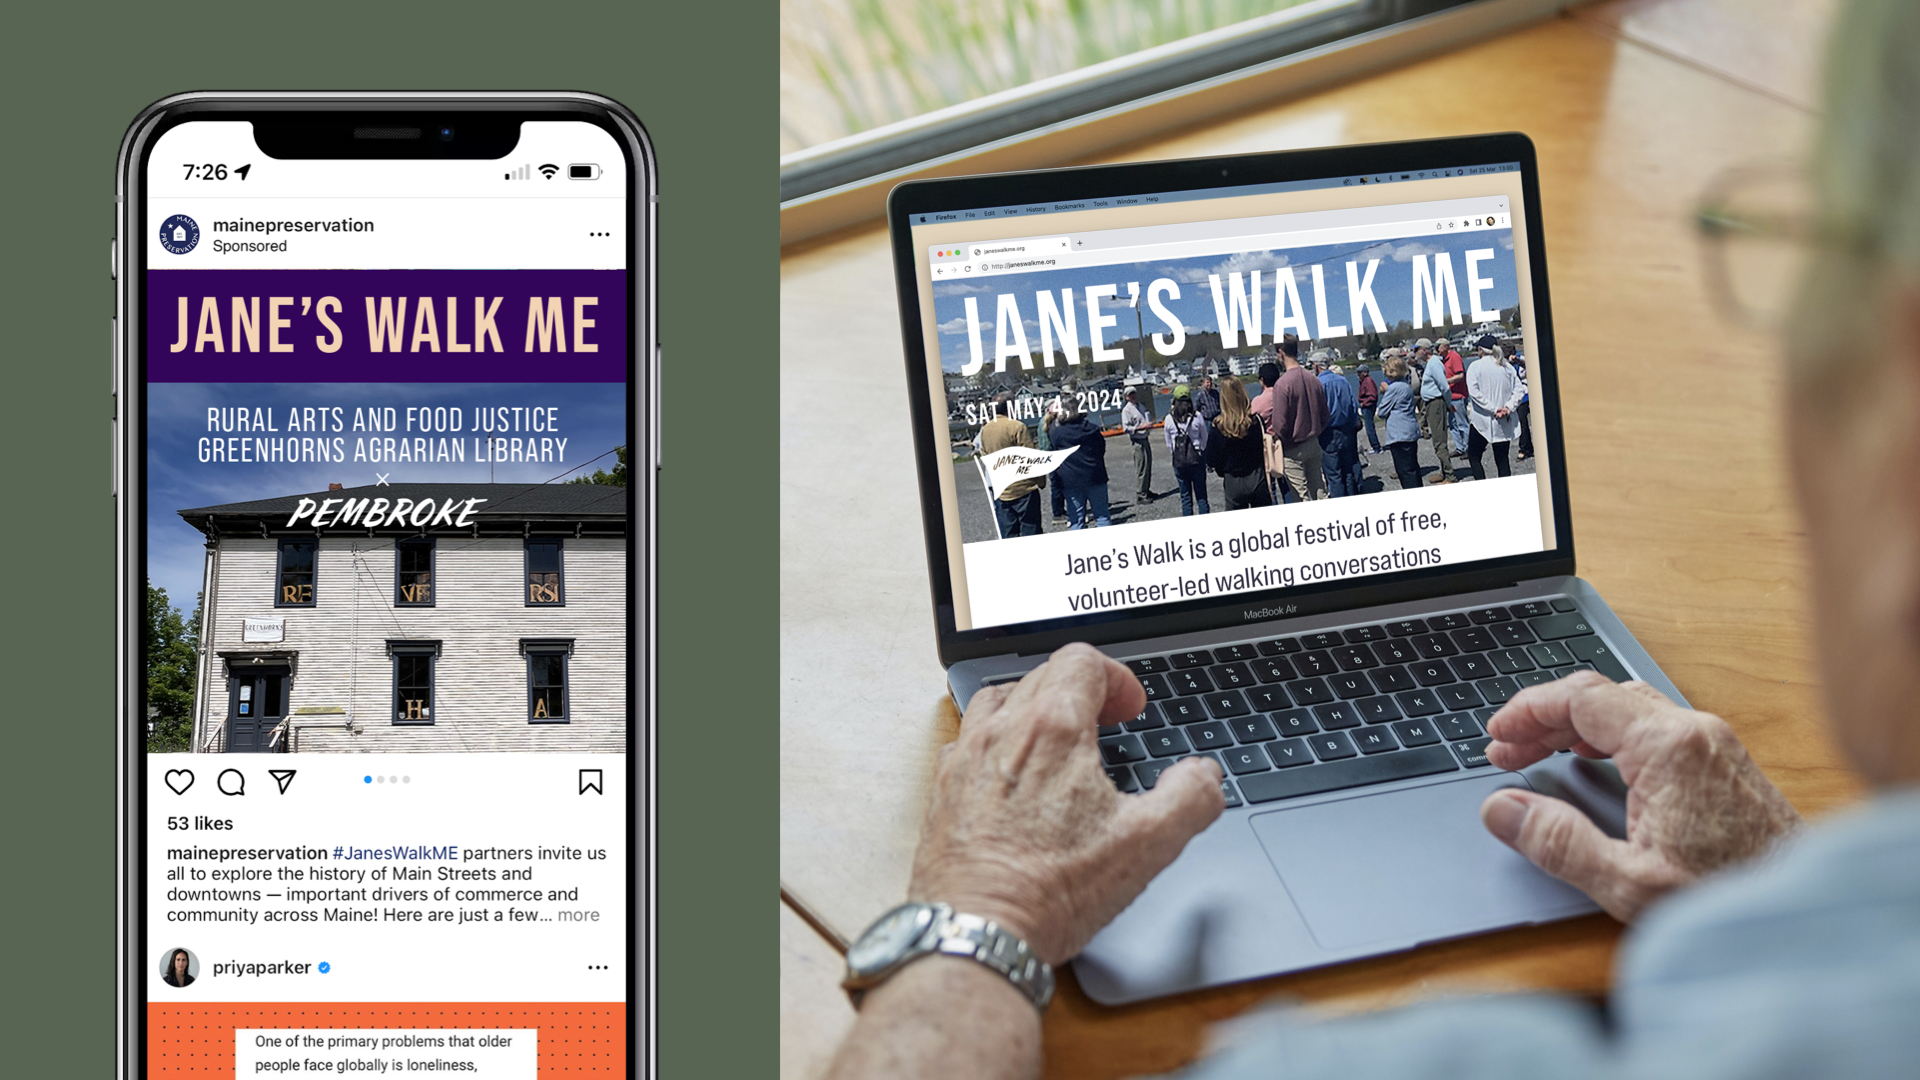 Jane's Walk in Maine advertisements on phone and computer